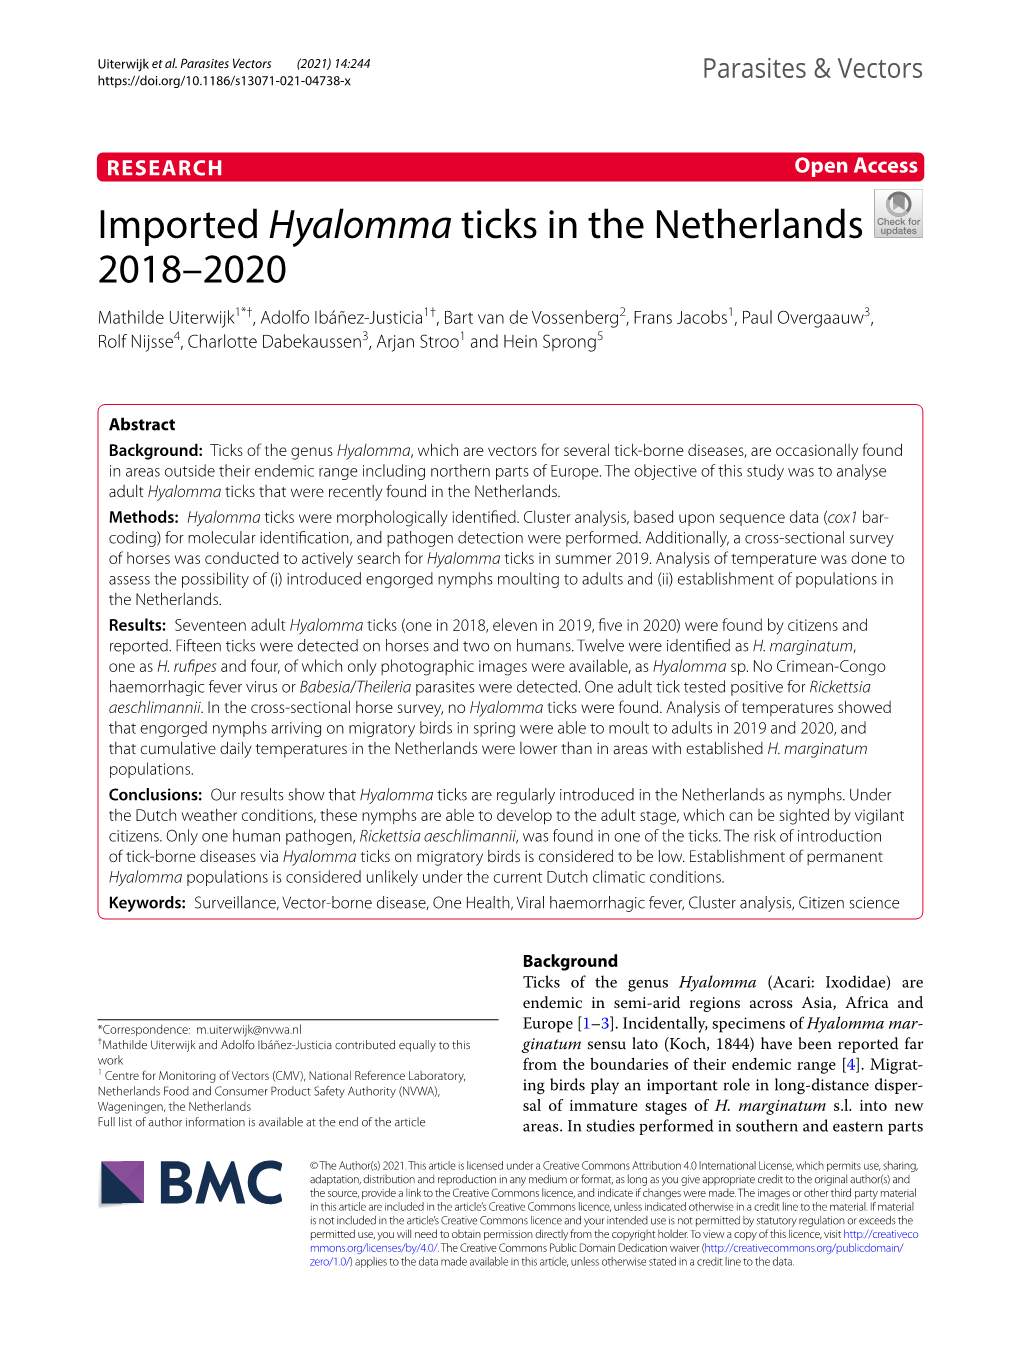 Imported Hyalomma Ticks in the Netherlands 2018–2020